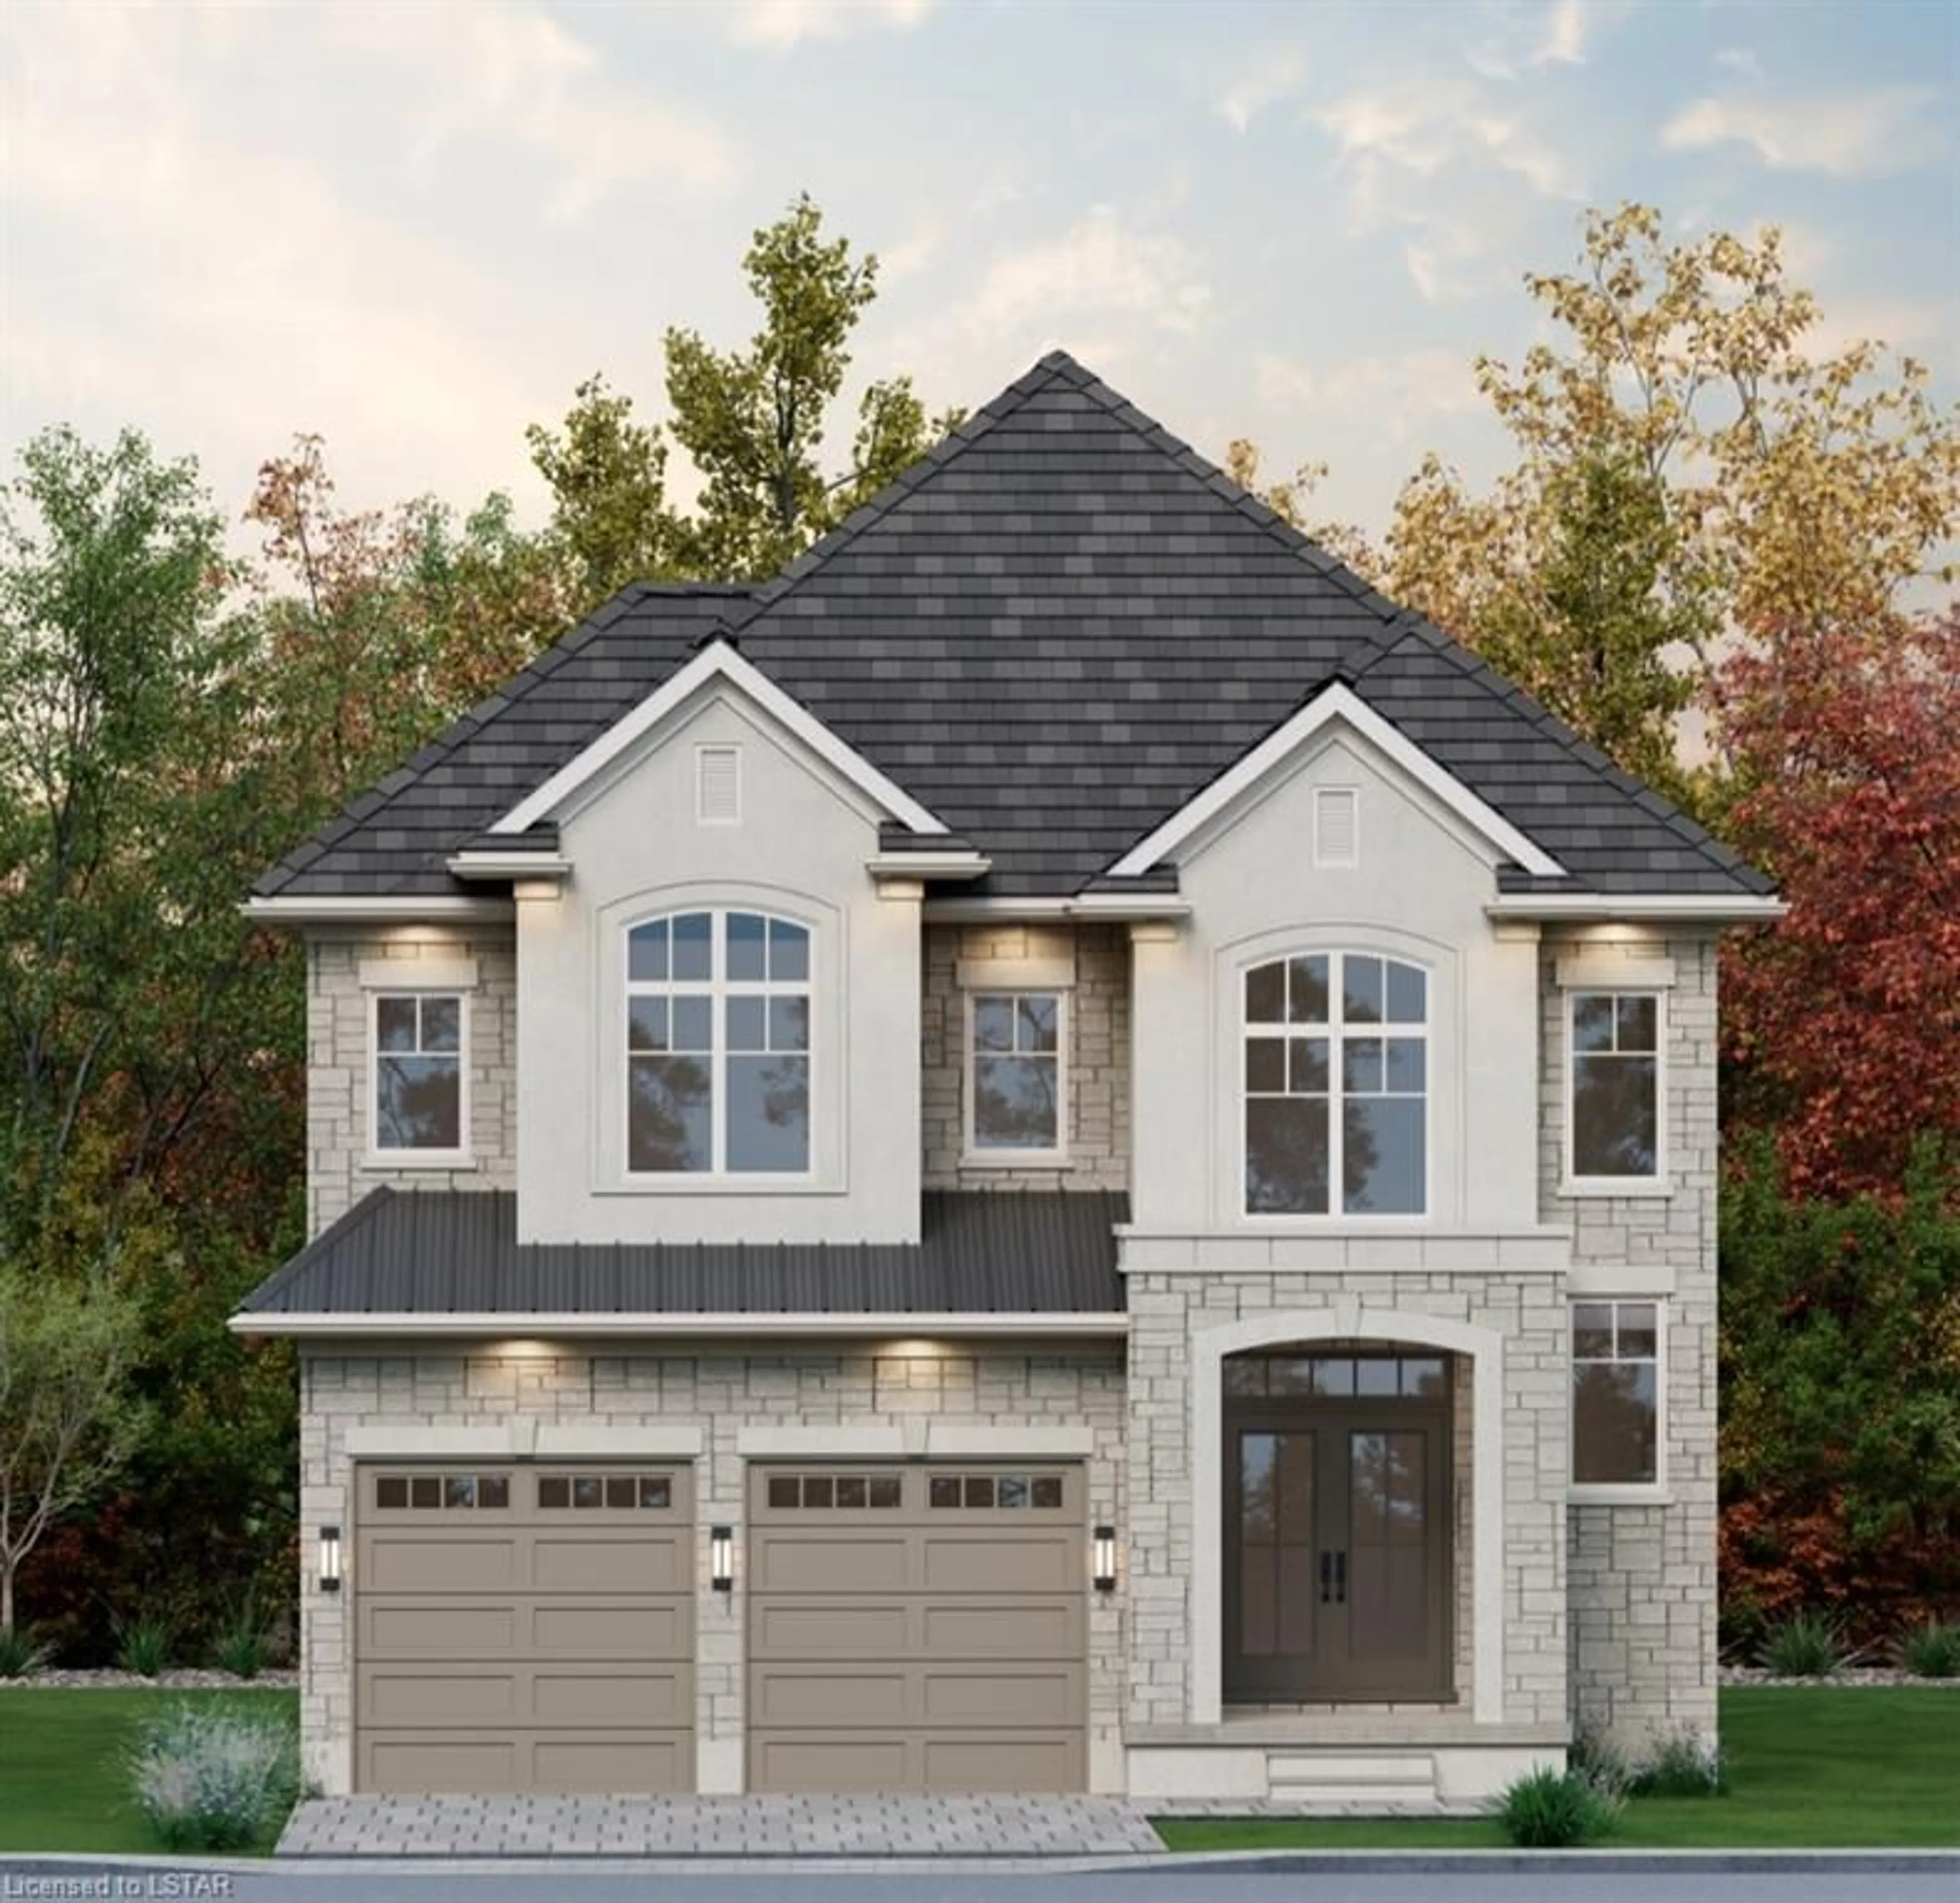 Home with brick exterior material for LOT #77 Heathwoods Ave, London Ontario N6P 1H5